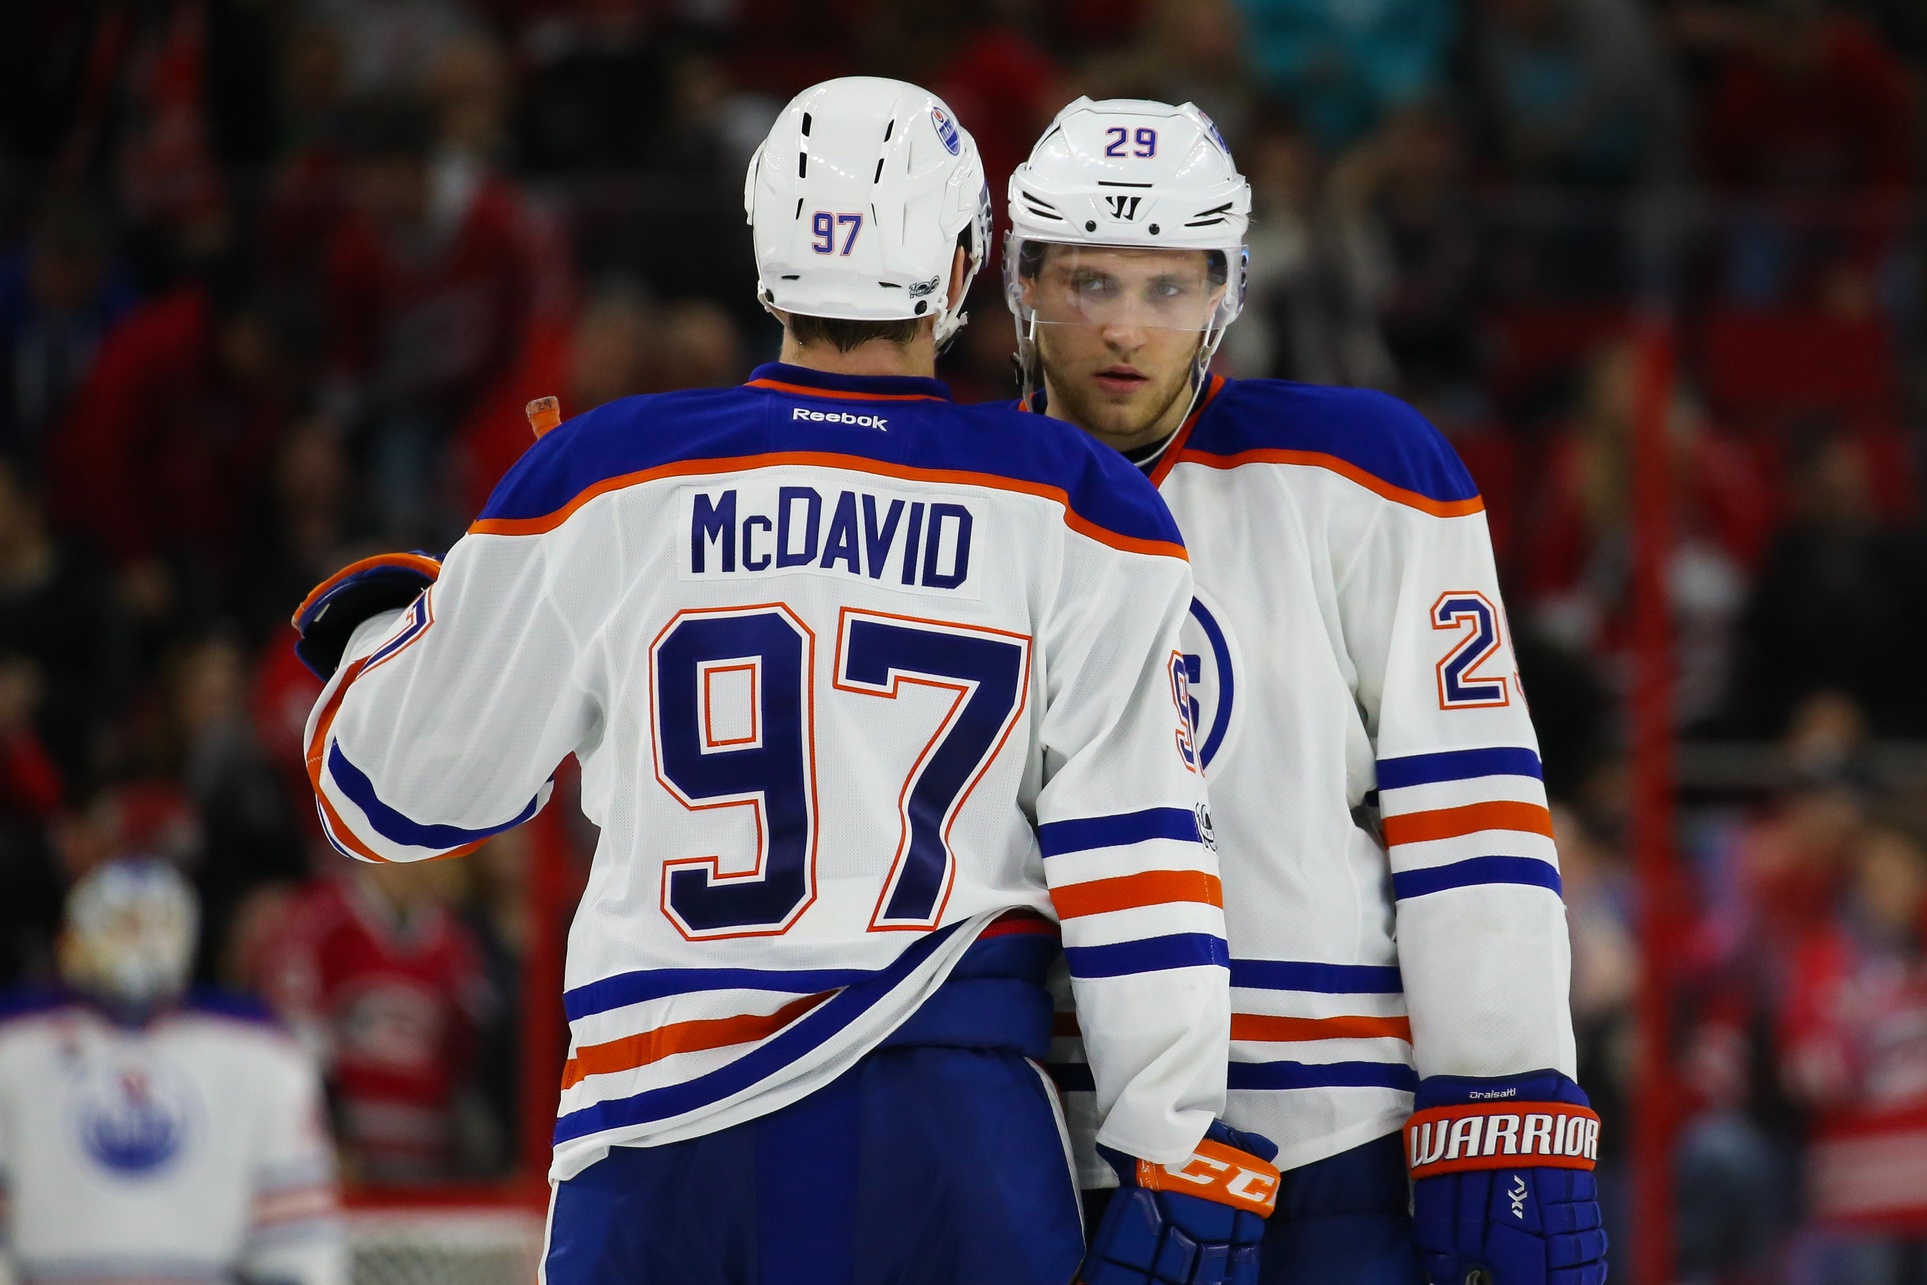 Edmonton Oilers: Can Leon Draisaitl two-peat as the NHL's points